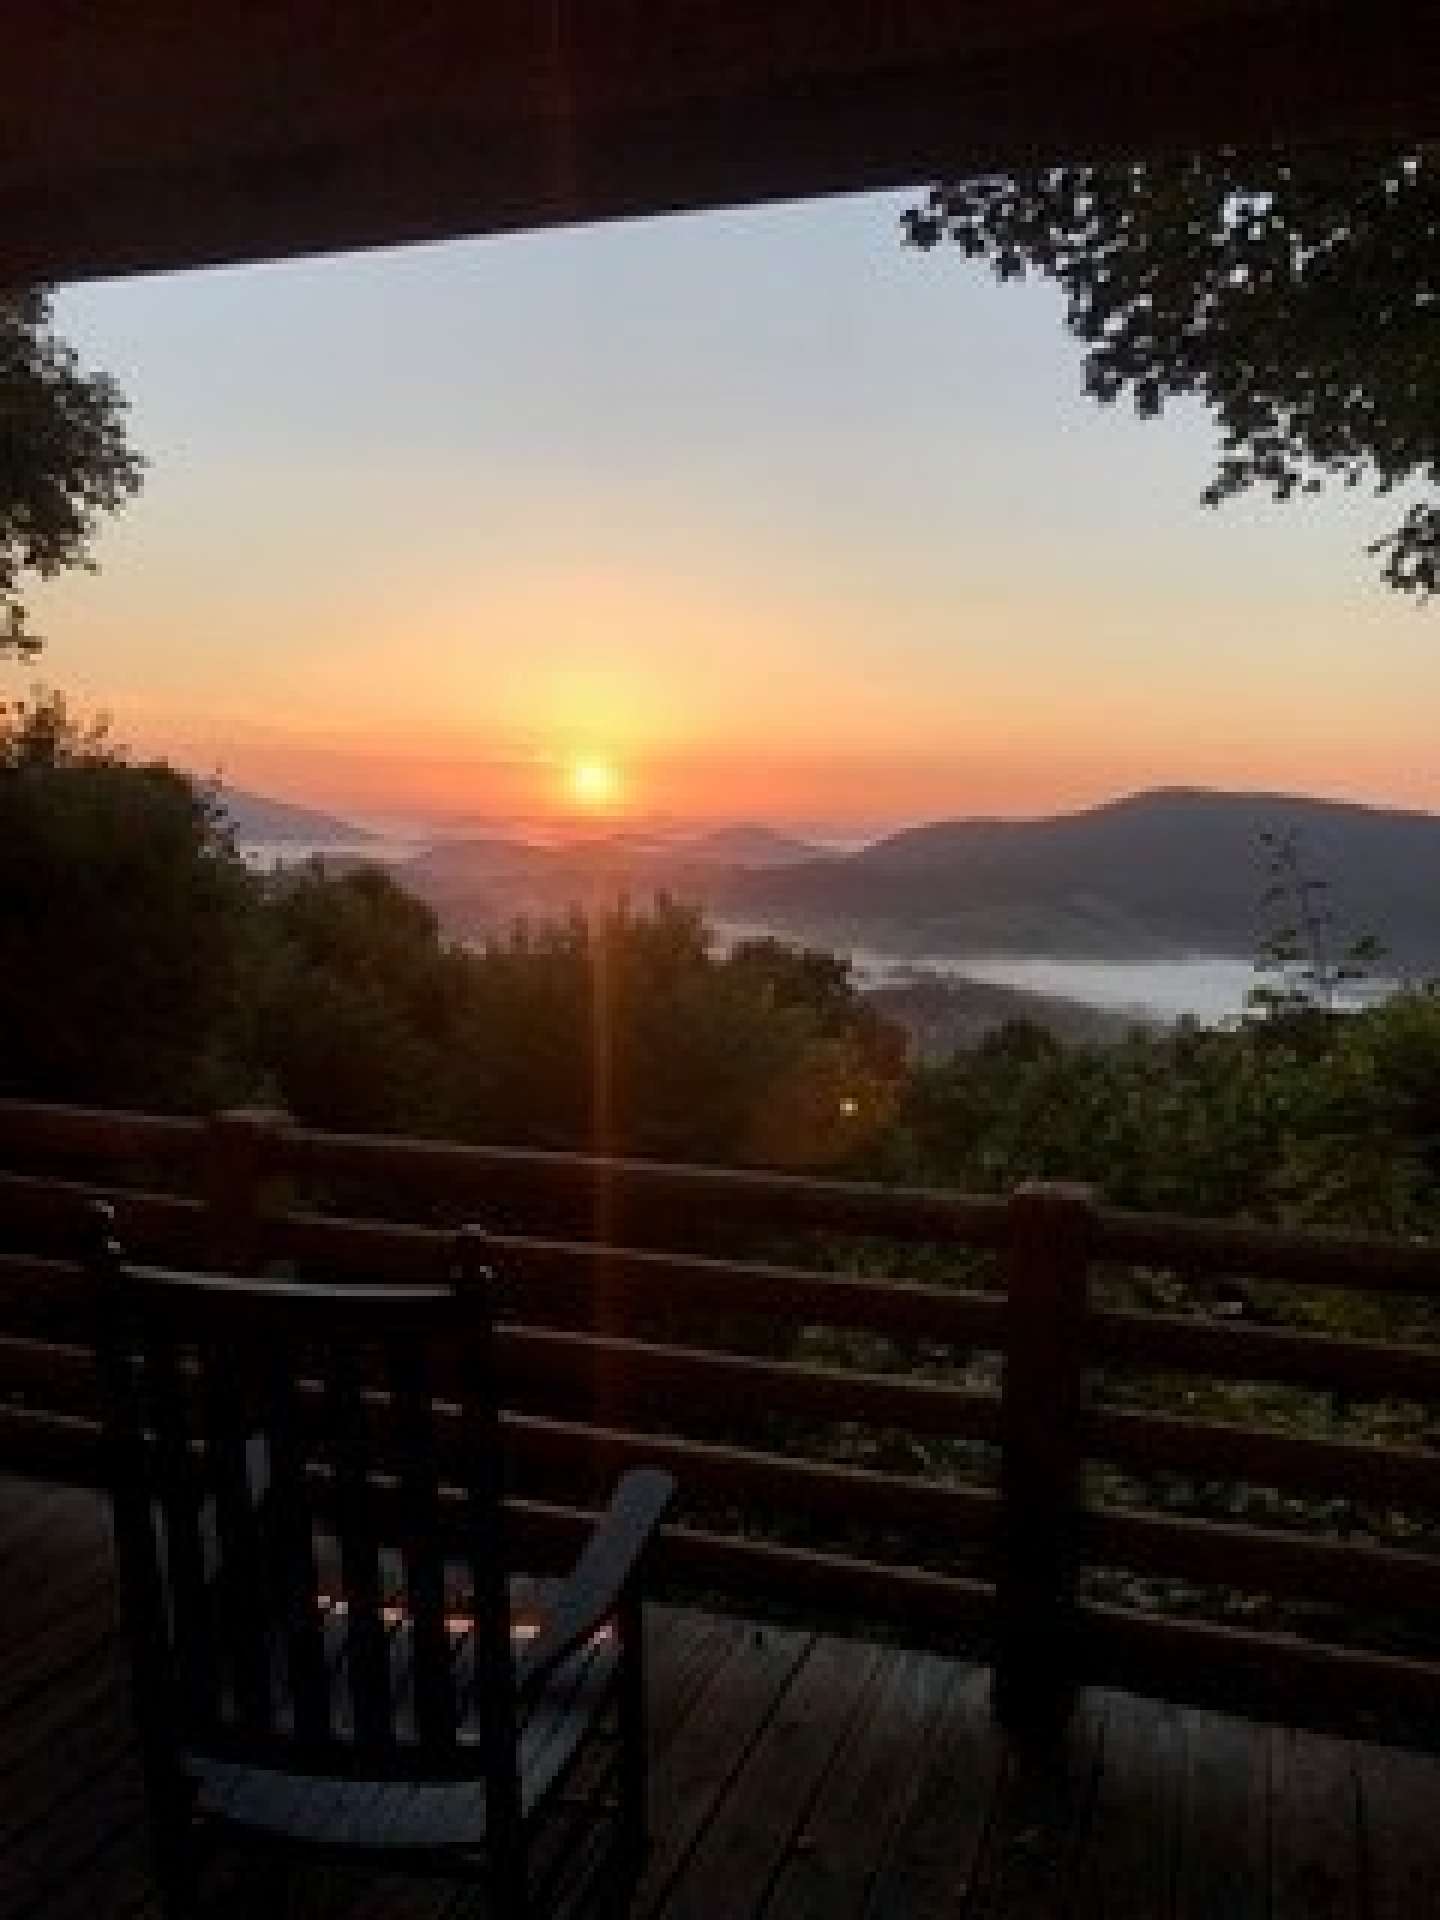 This sunrise photo was taken by the owners on their first morning waking up in this "memory maker" Stonebridge cabin.